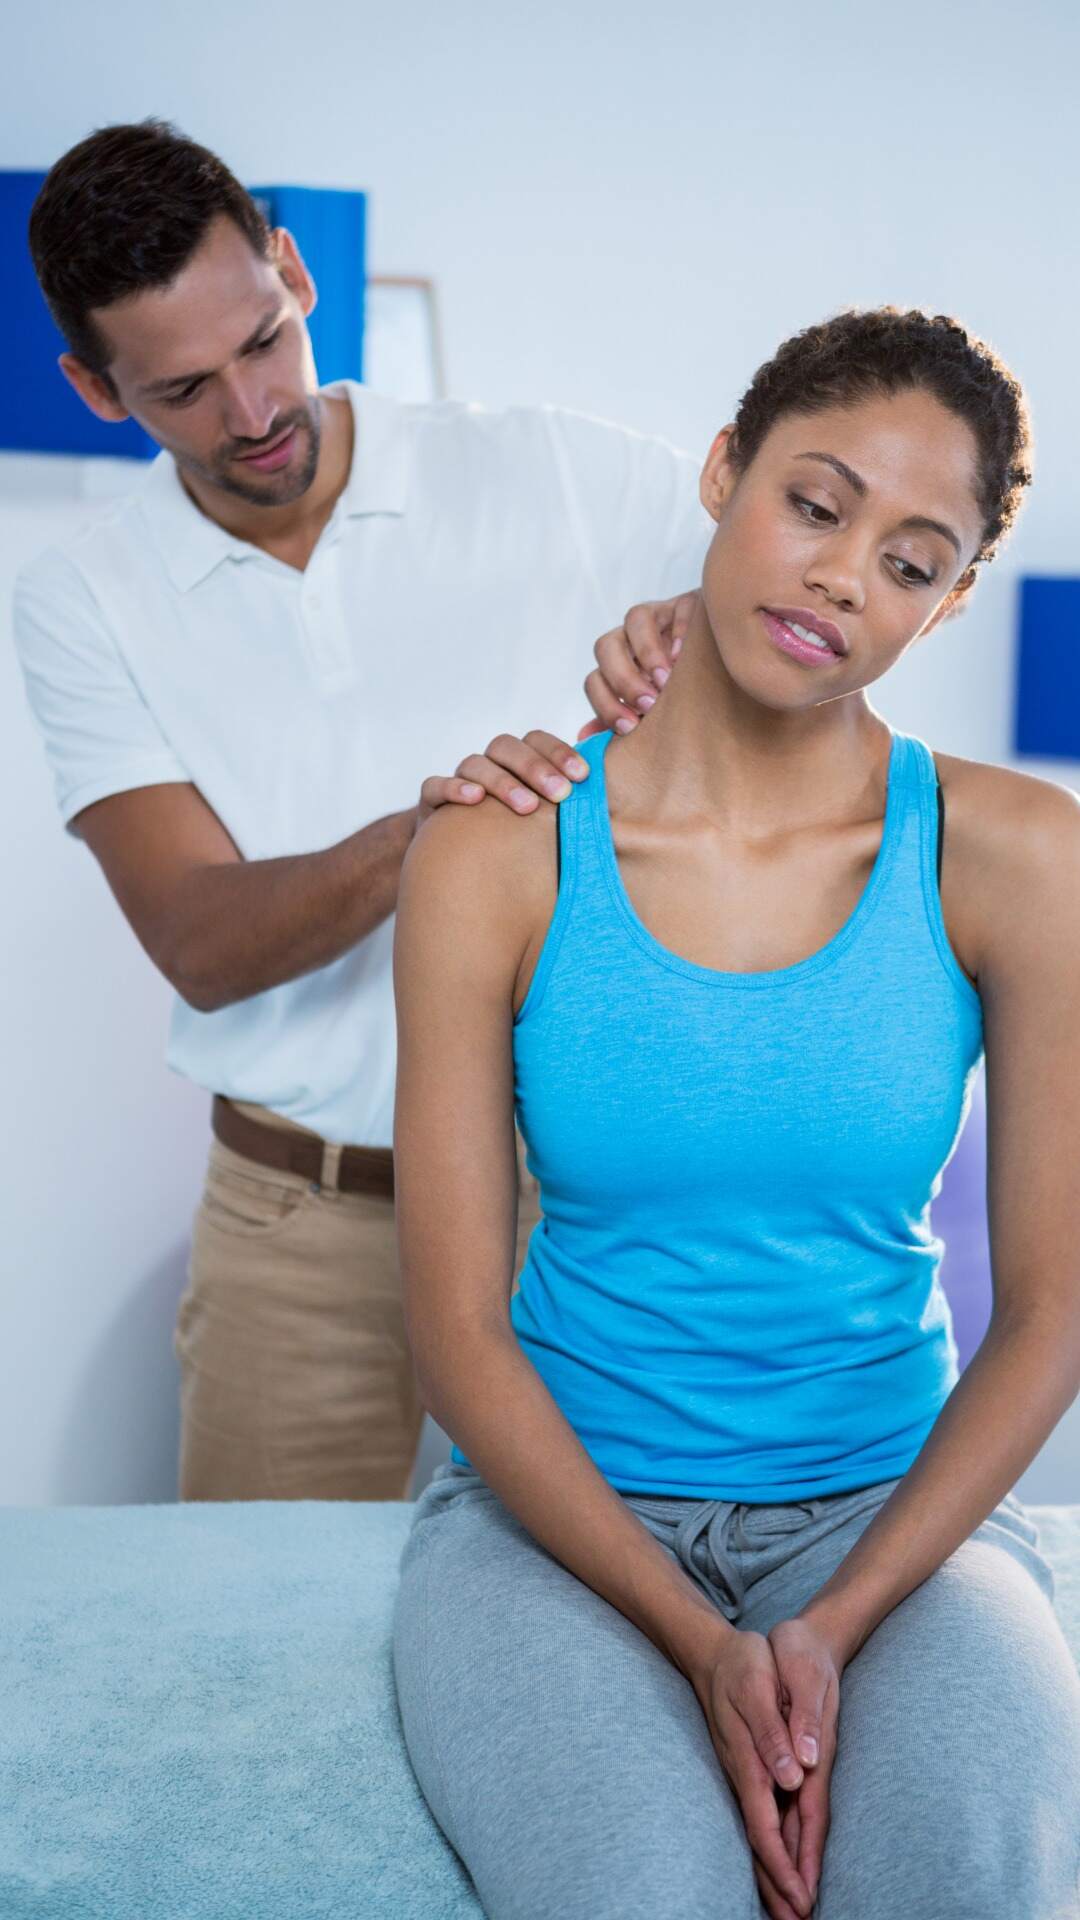 physical therapy after a car crash includes assessing neck and back injury